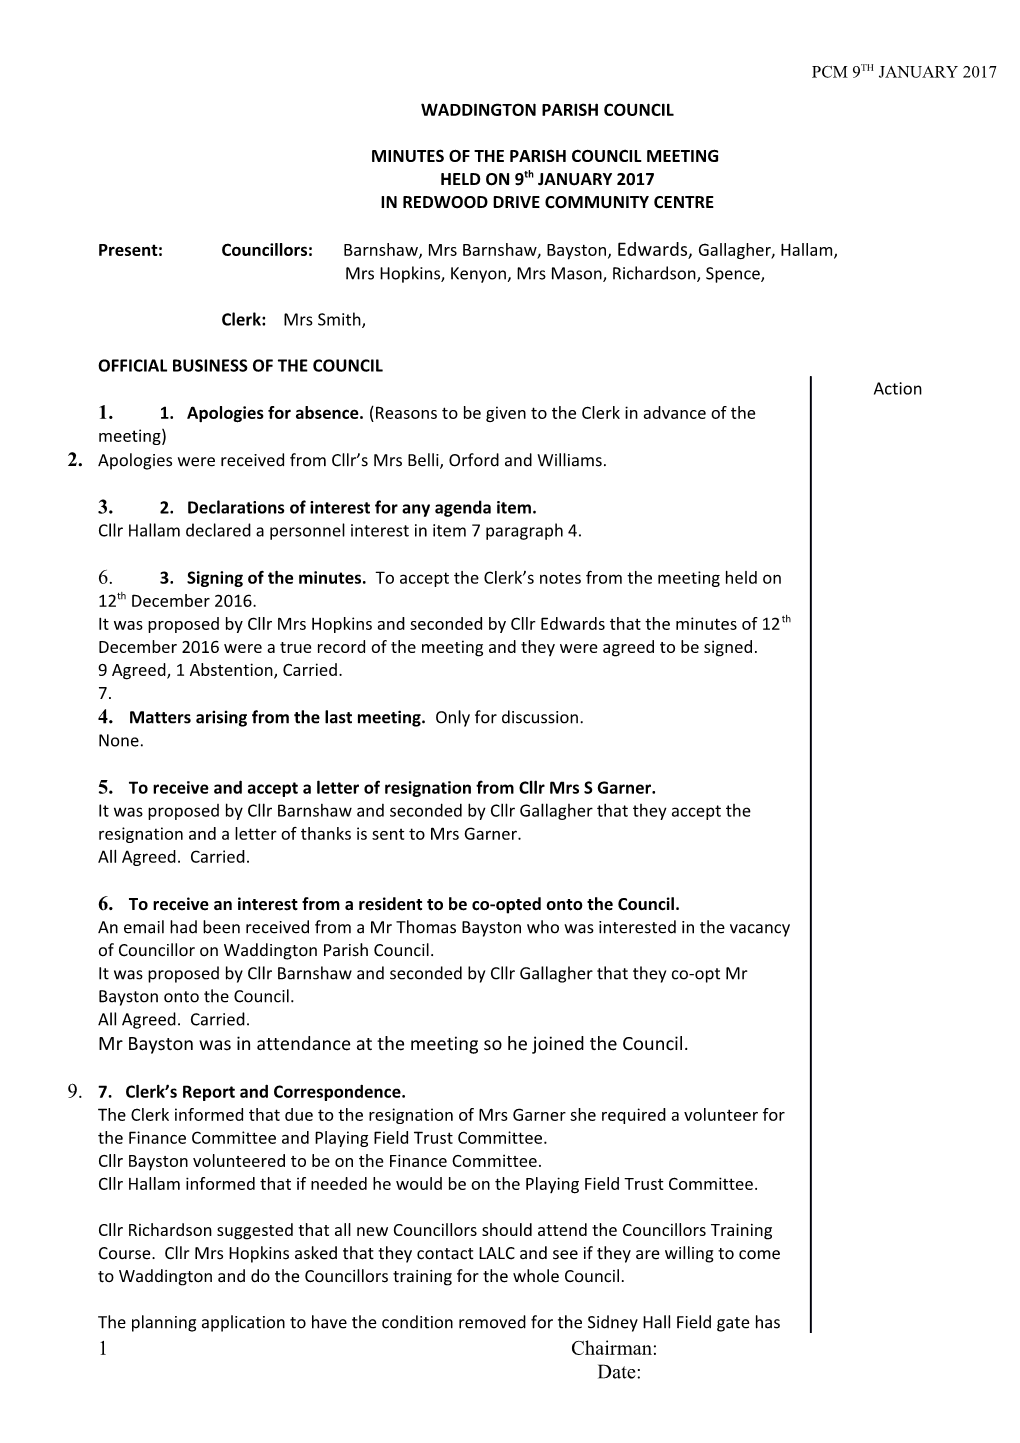 Minutes of the Parish Council Meeting s3